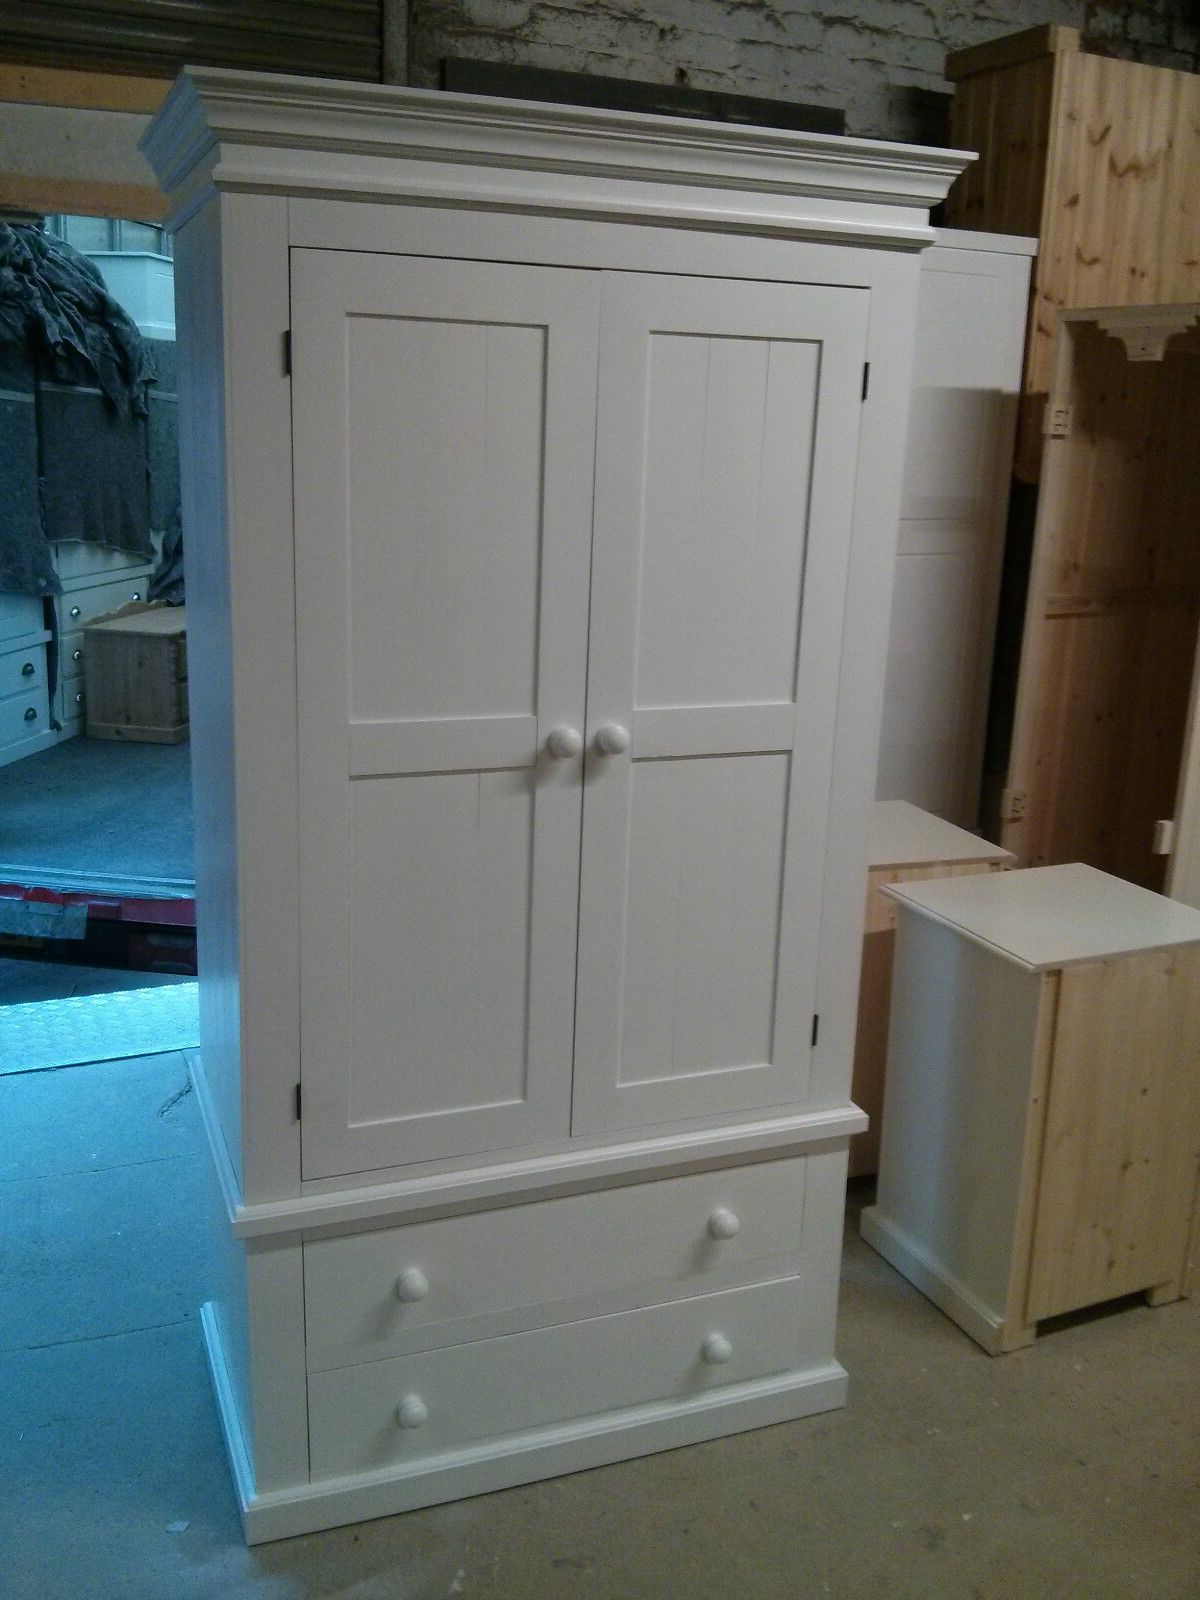 Pine Victorian Gents 2 Drawer Wardrobe Painted White Shabby Chic | Ebay For Cheap Shabby Chic Wardrobes (View 2 of 20)